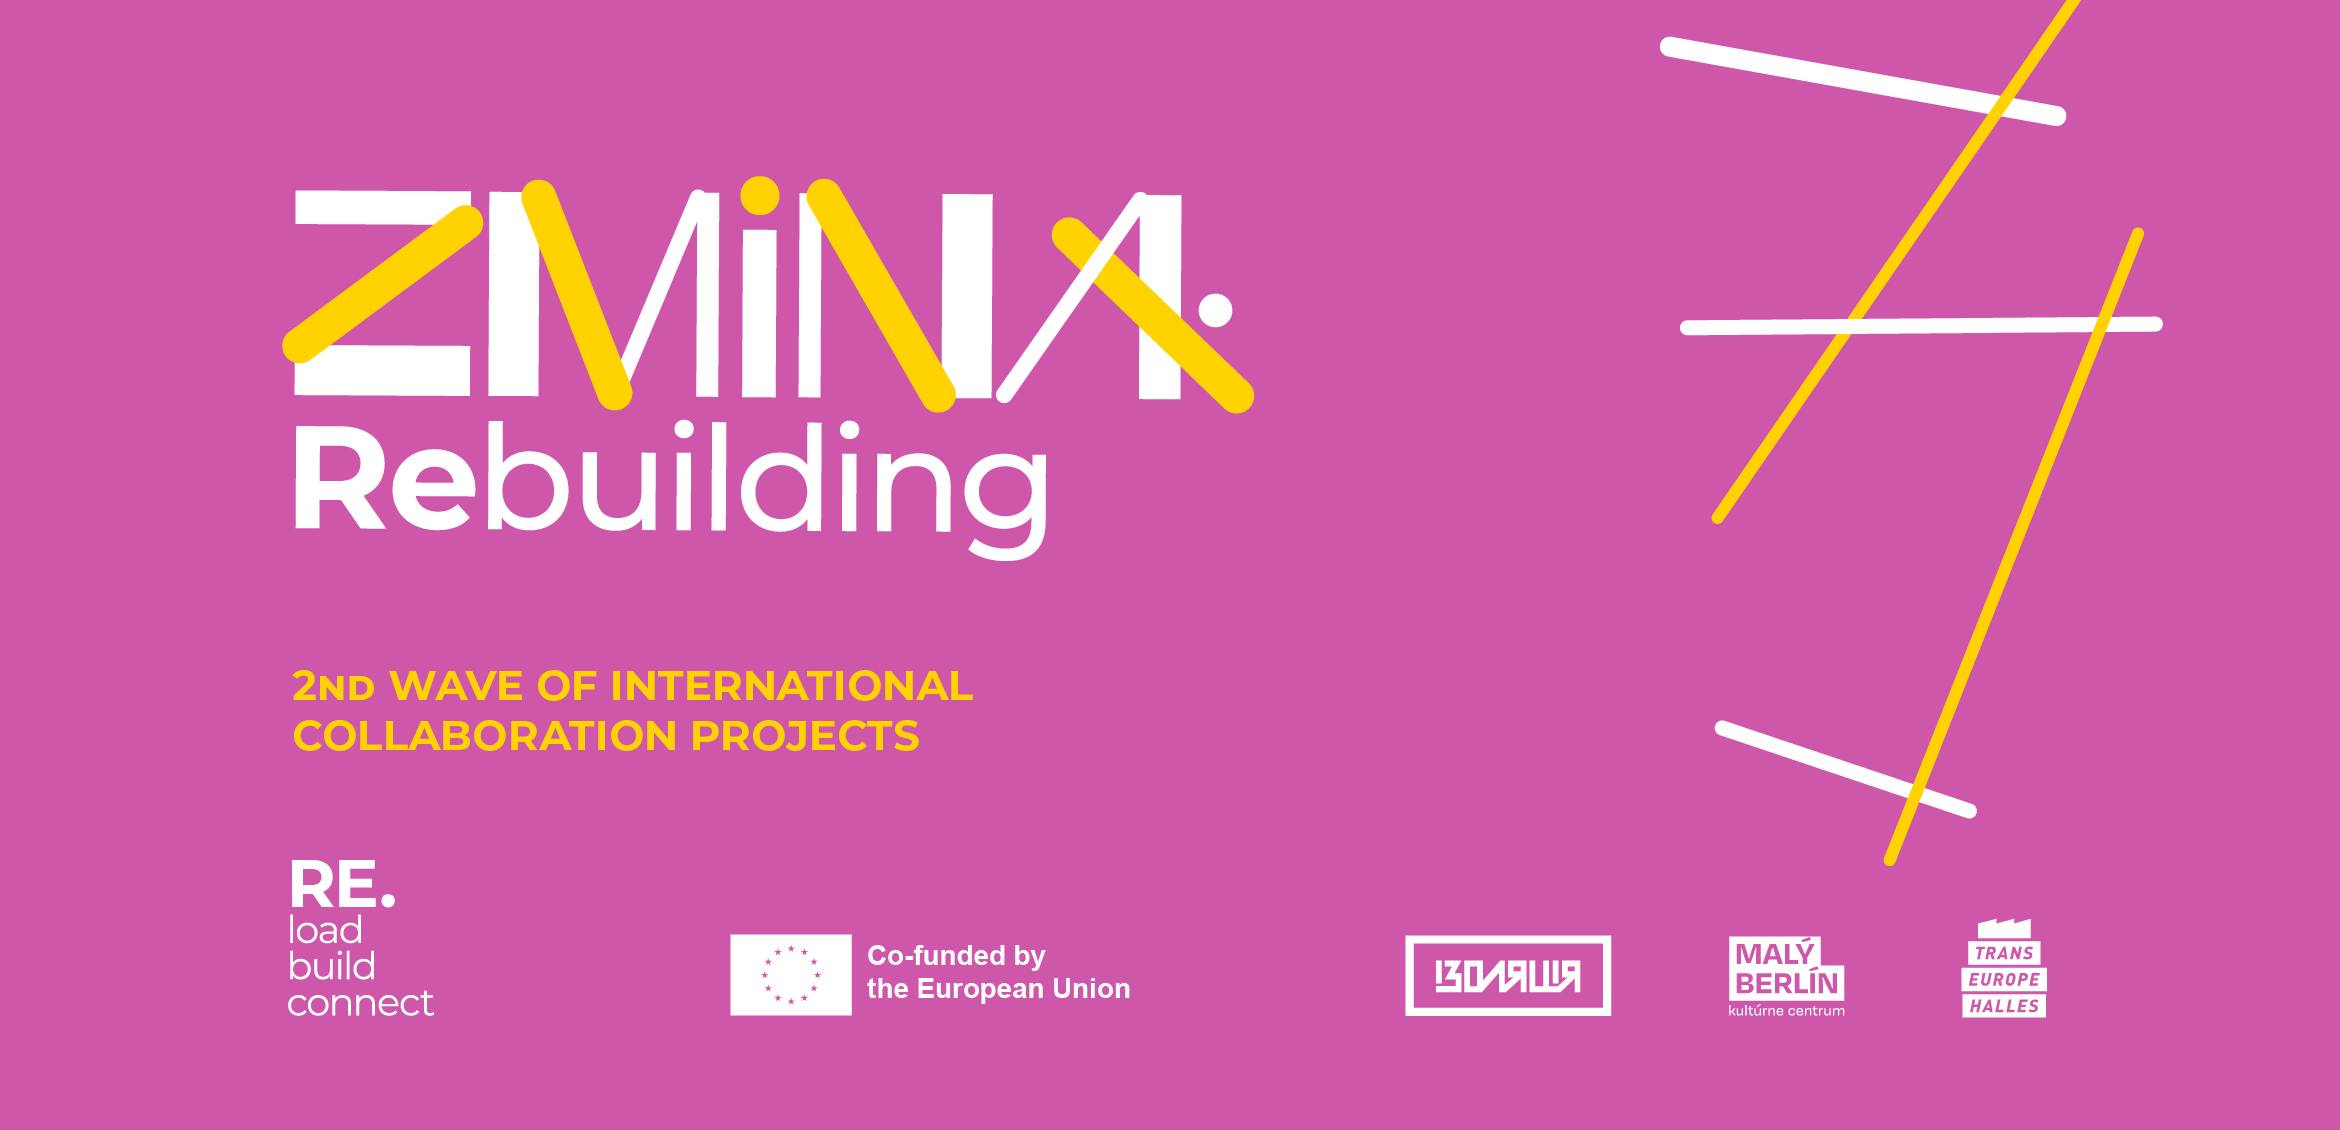 ZMINA: Rebuilding. The second call for proposals for international projects